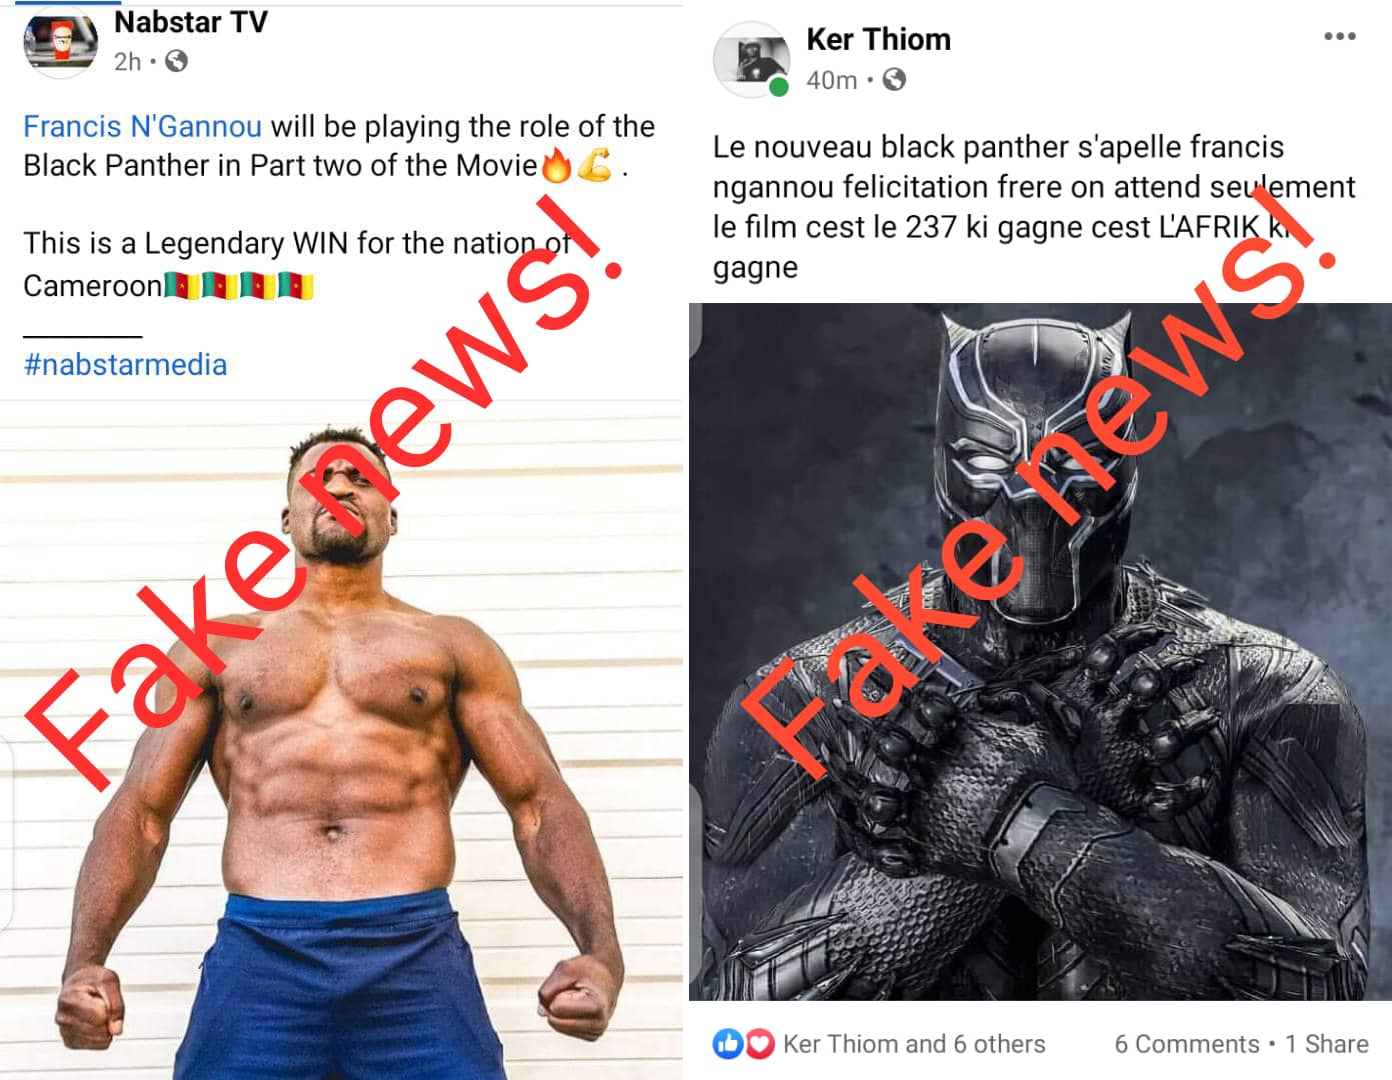 Fact-checking: No, Francis Ngannou is not playing Black Panther movie role